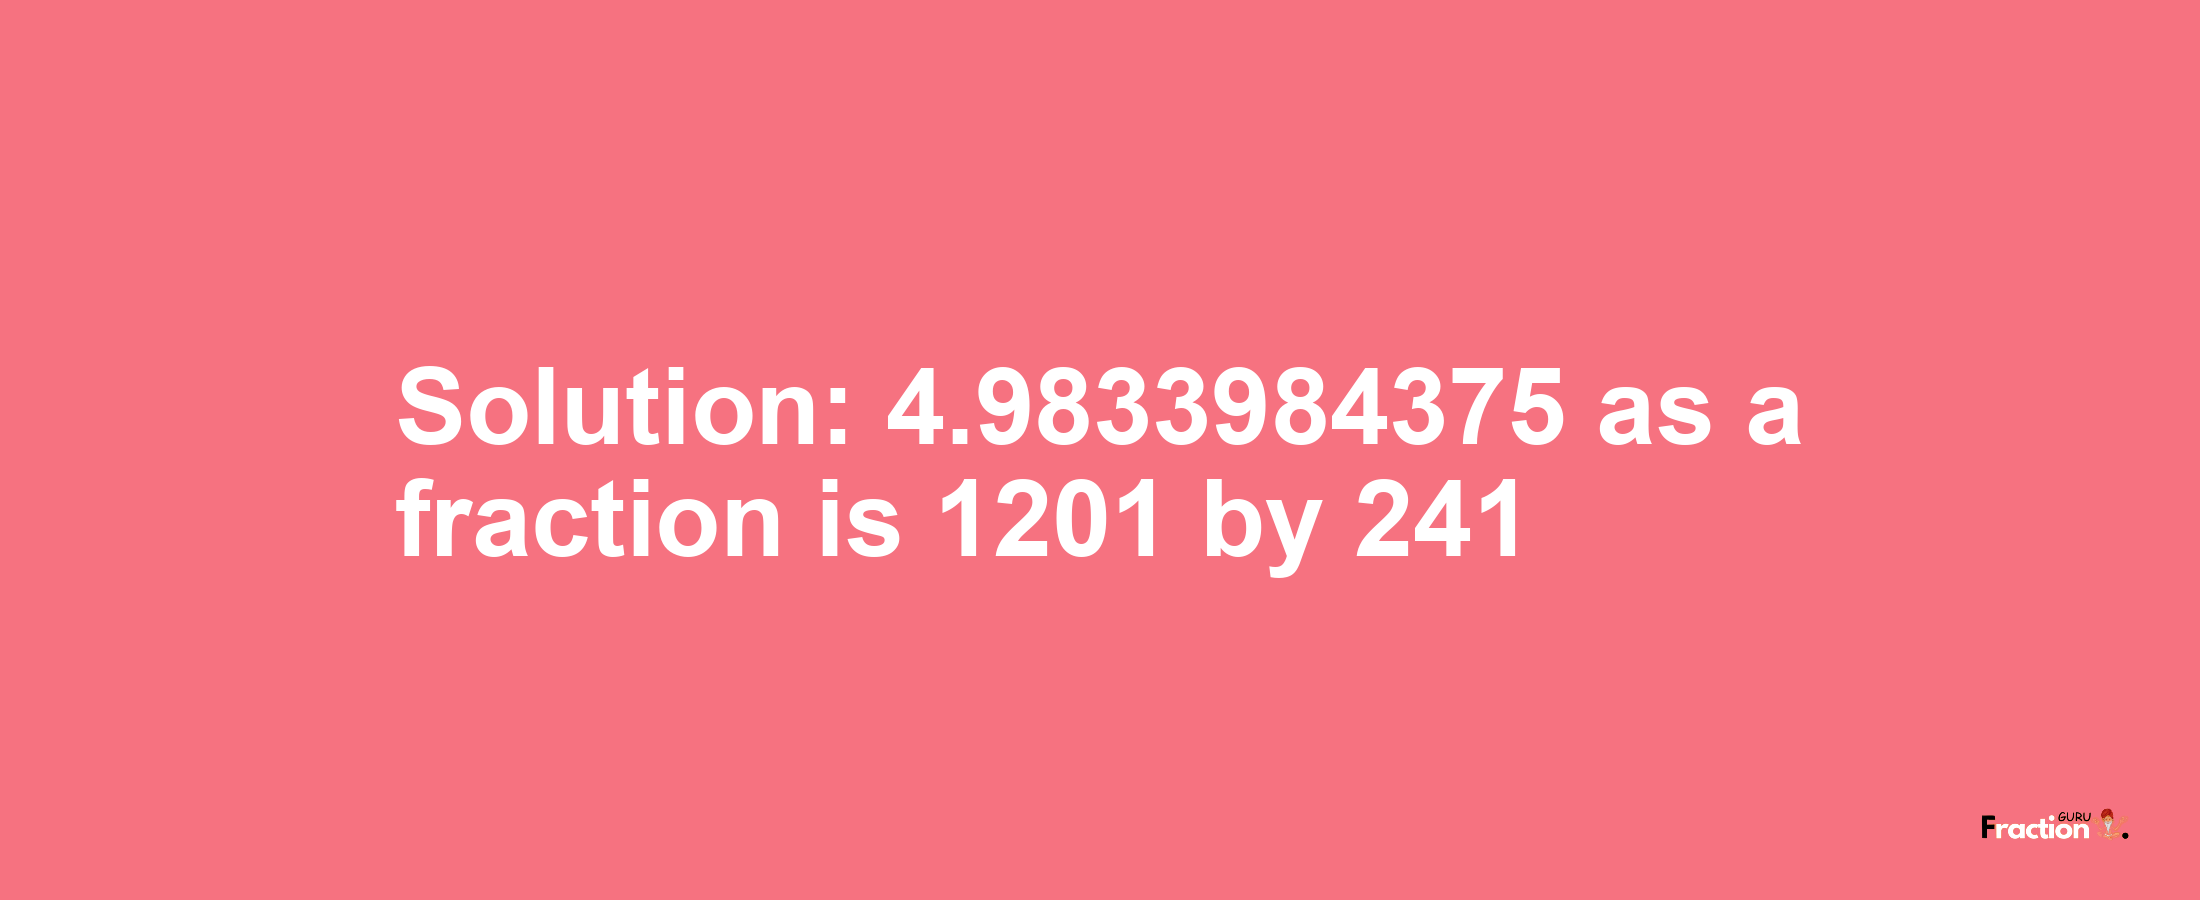 Solution:4.9833984375 as a fraction is 1201/241